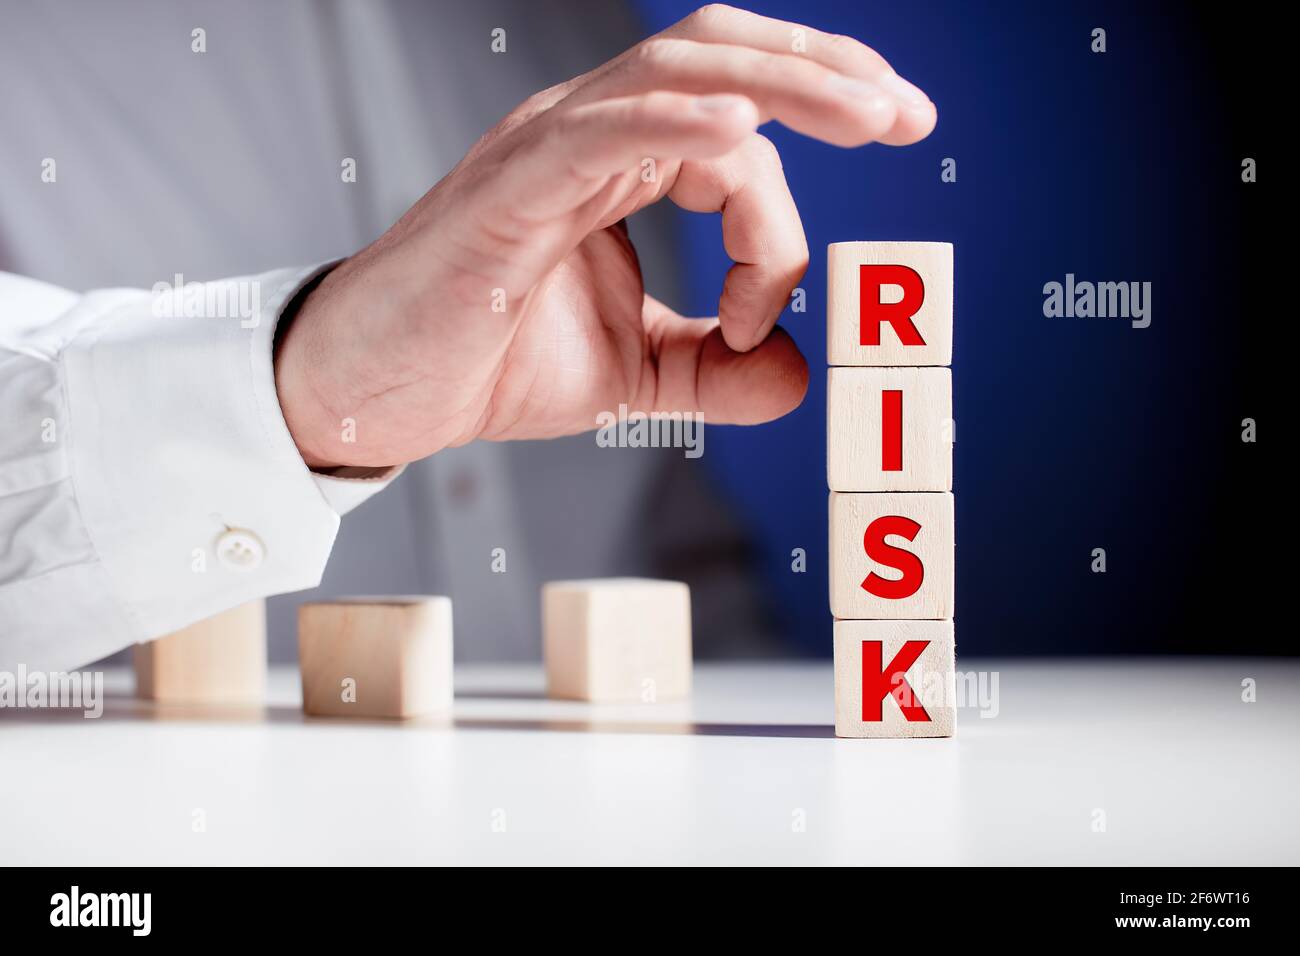 Businessman hand is about to flick the wooden cubes with the word risk. To avoid or eliminate risk in business finance decisions. Stock Photo